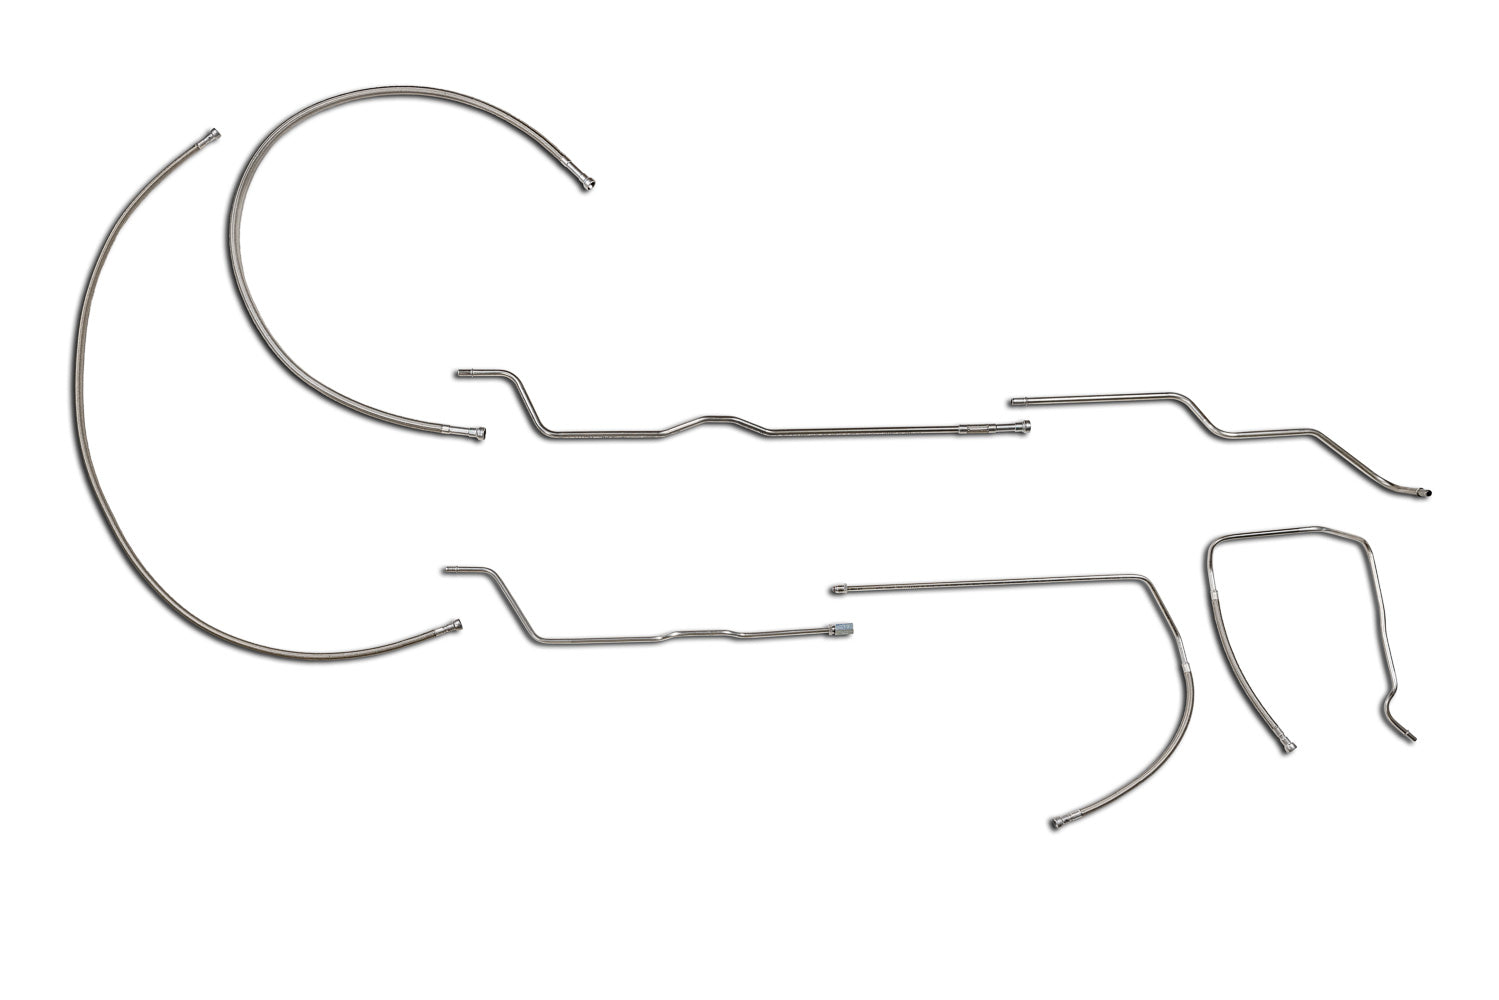 Chevy Silverado Fuel Line Set 2004 C/K2500HD/3500 Crew Cab 6.6L SS887-A1D Stainless Steel